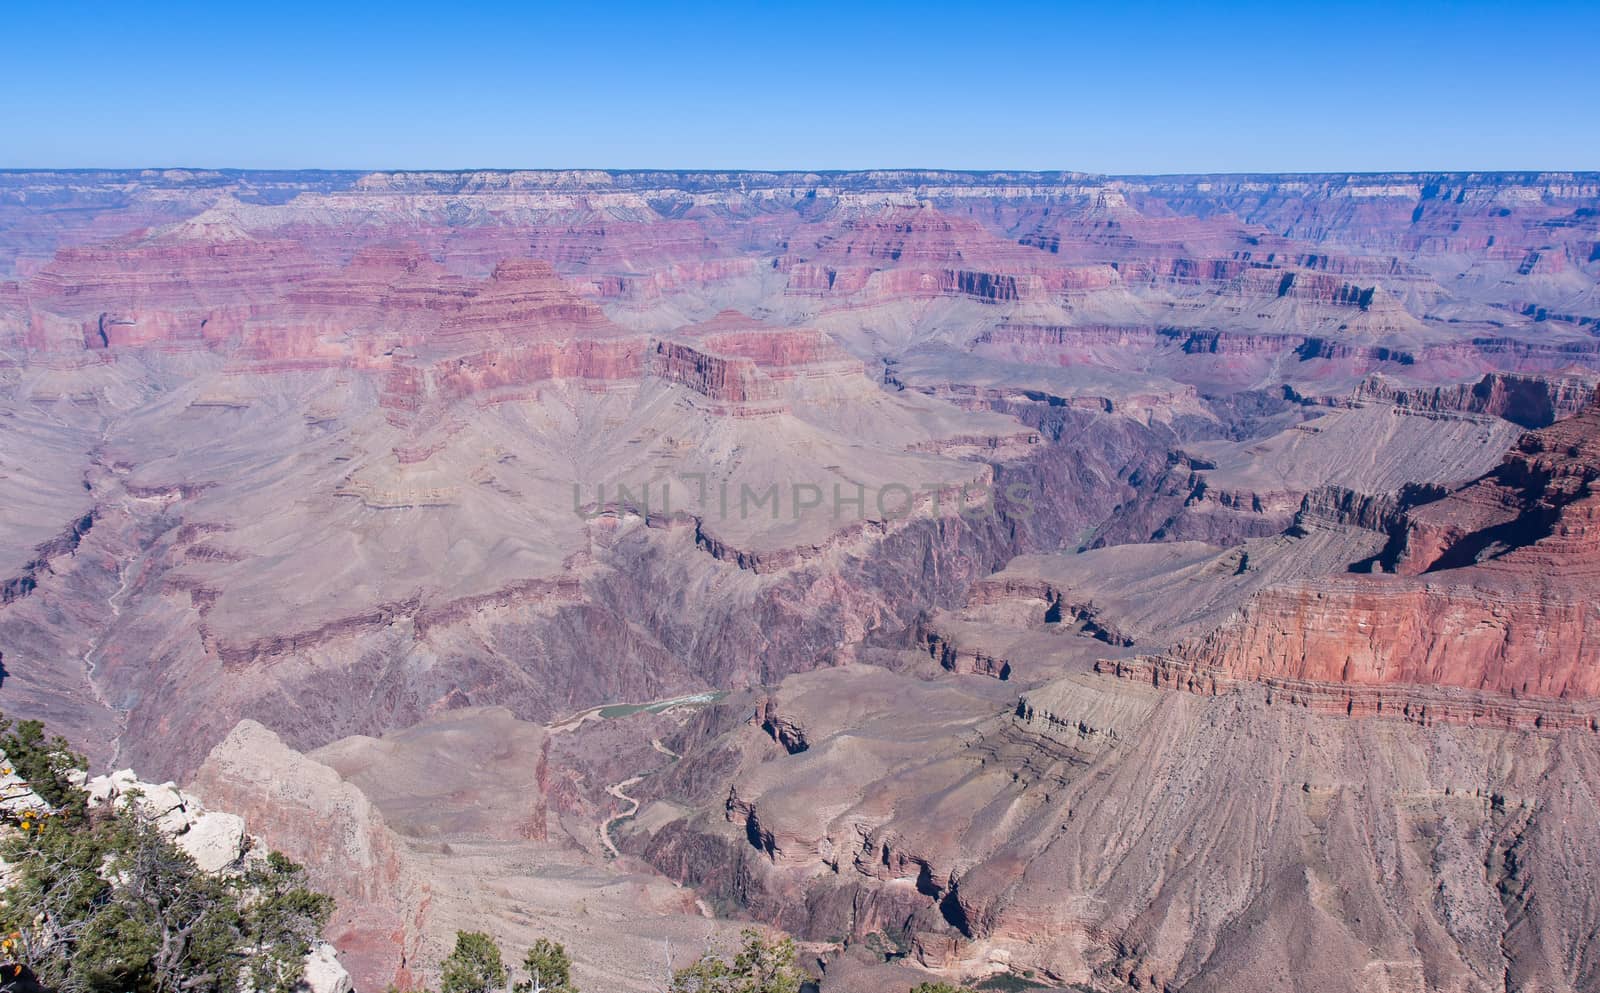 In this image can be seen many distinct layers dropping down to the Colorado River nearly a mile below.